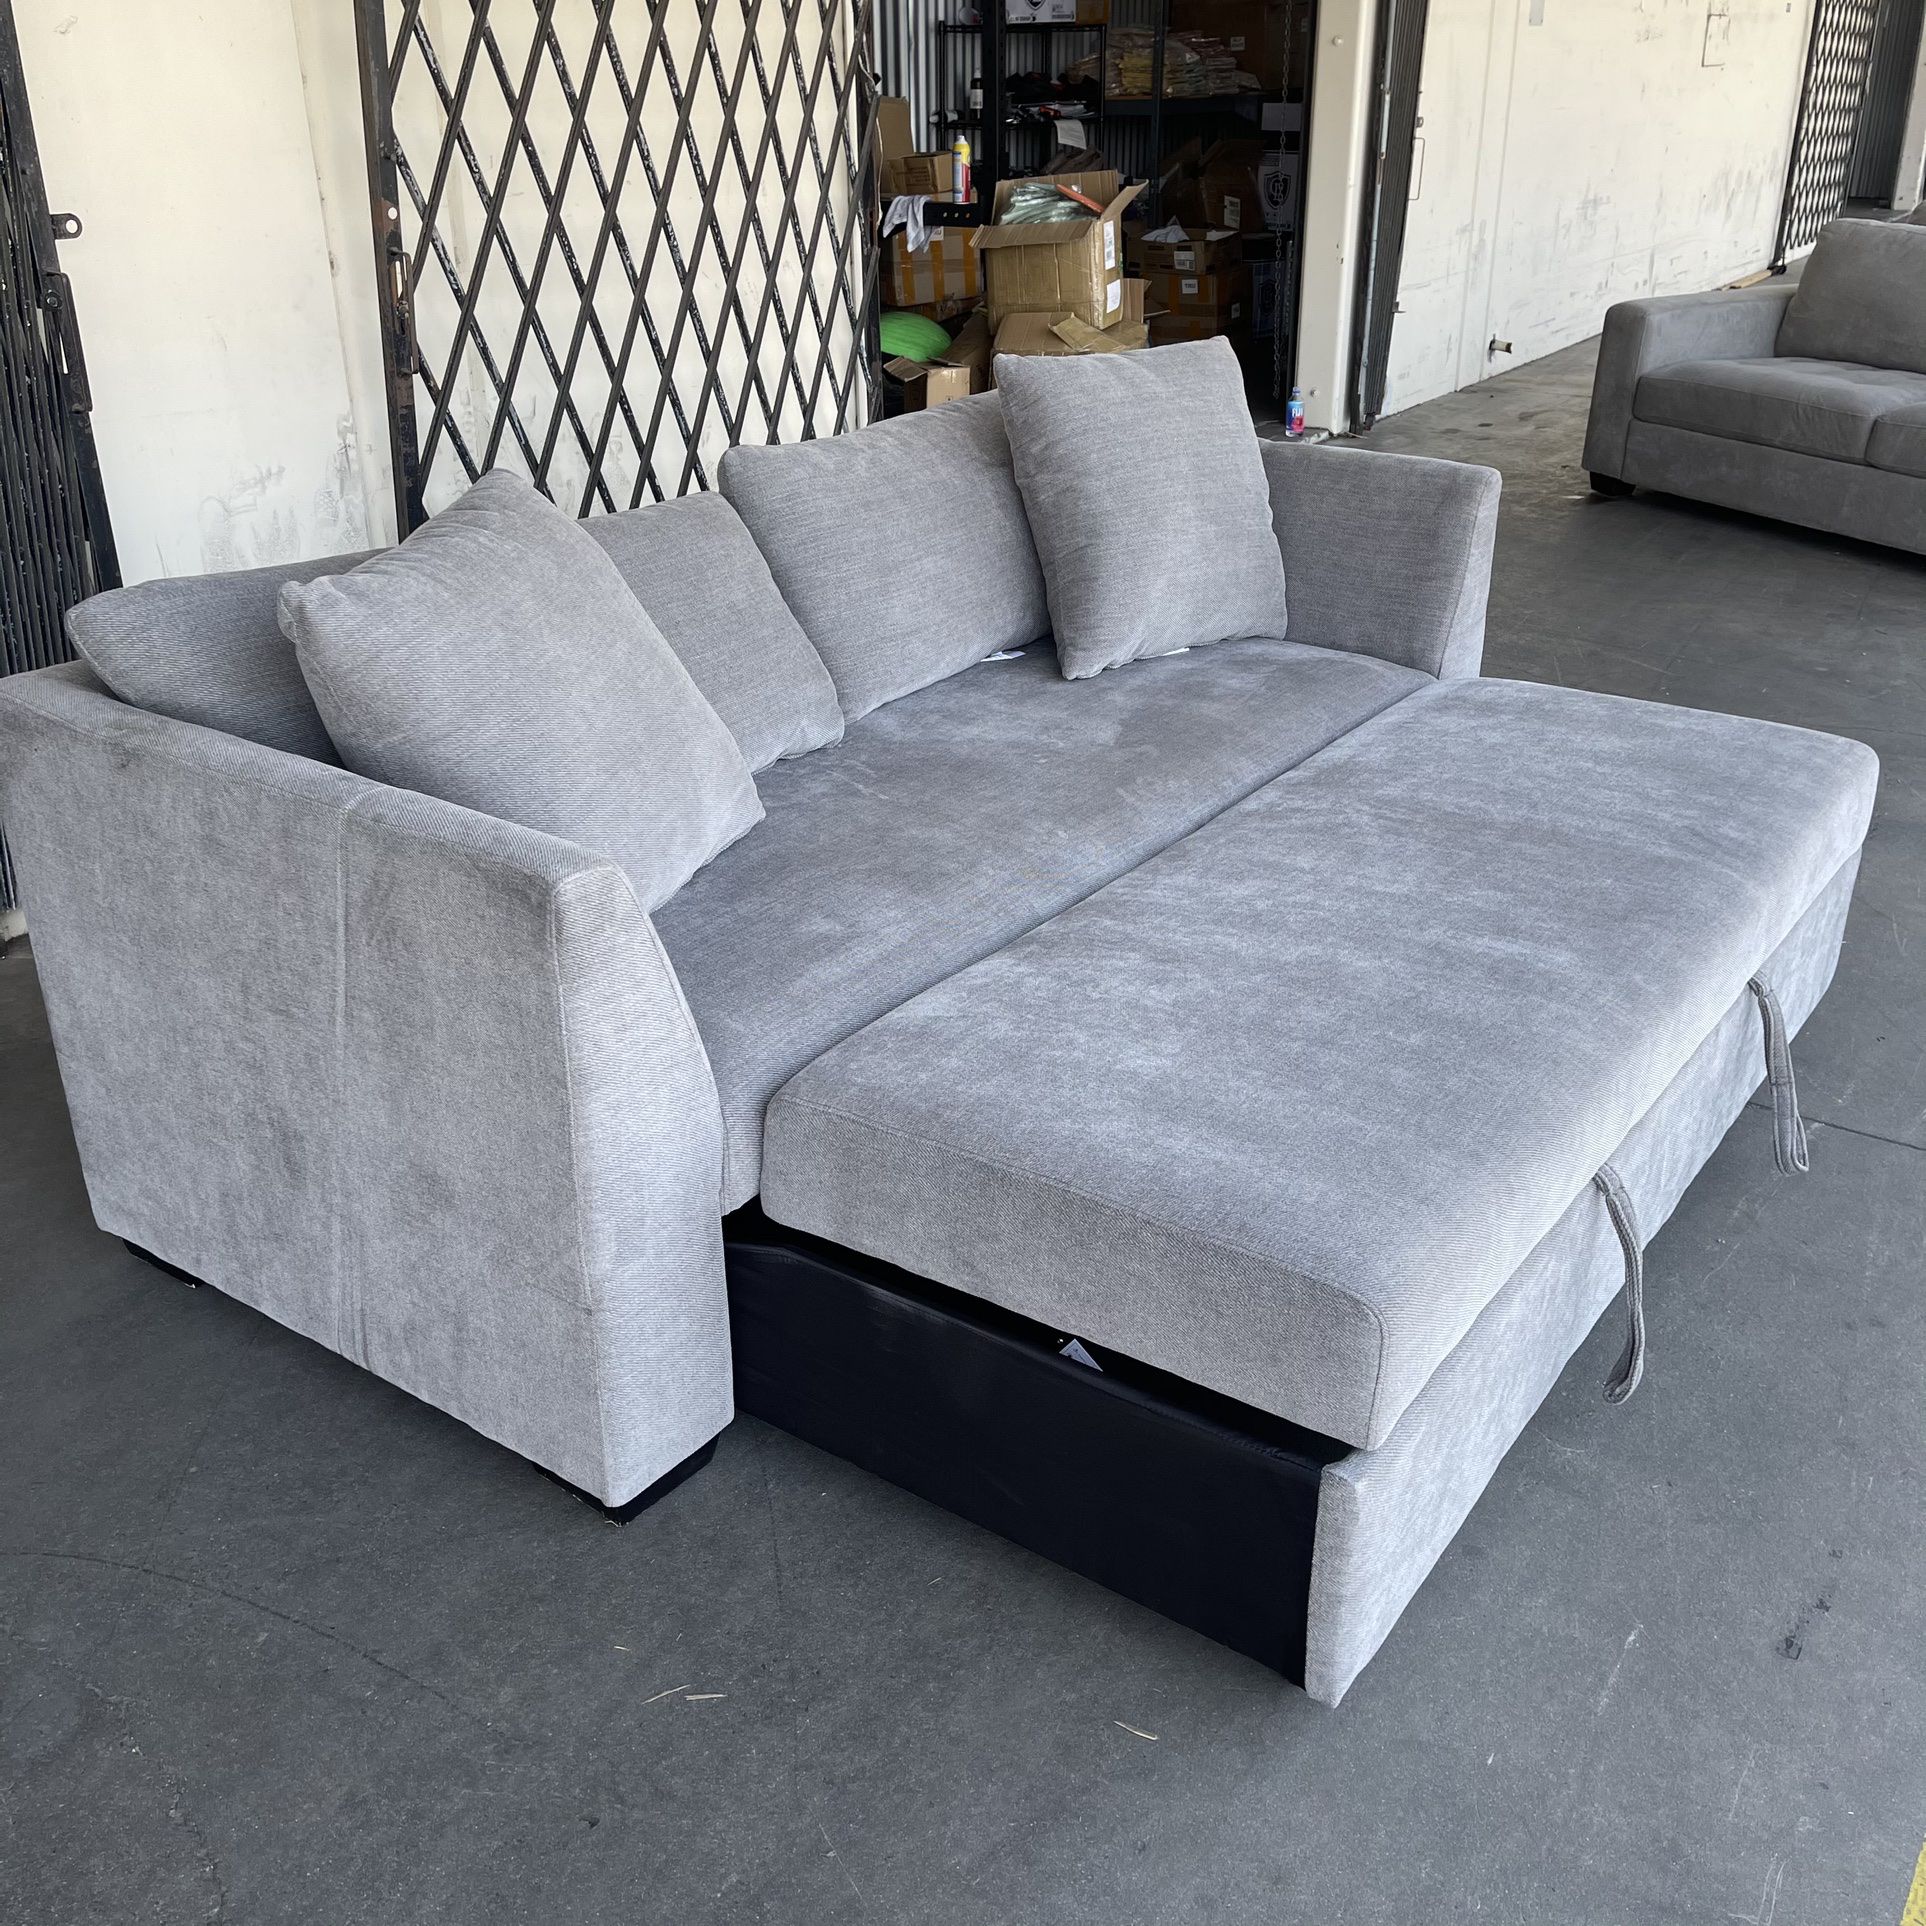 Marion Convertible Grey Sofa At A Great Price for Sale in La